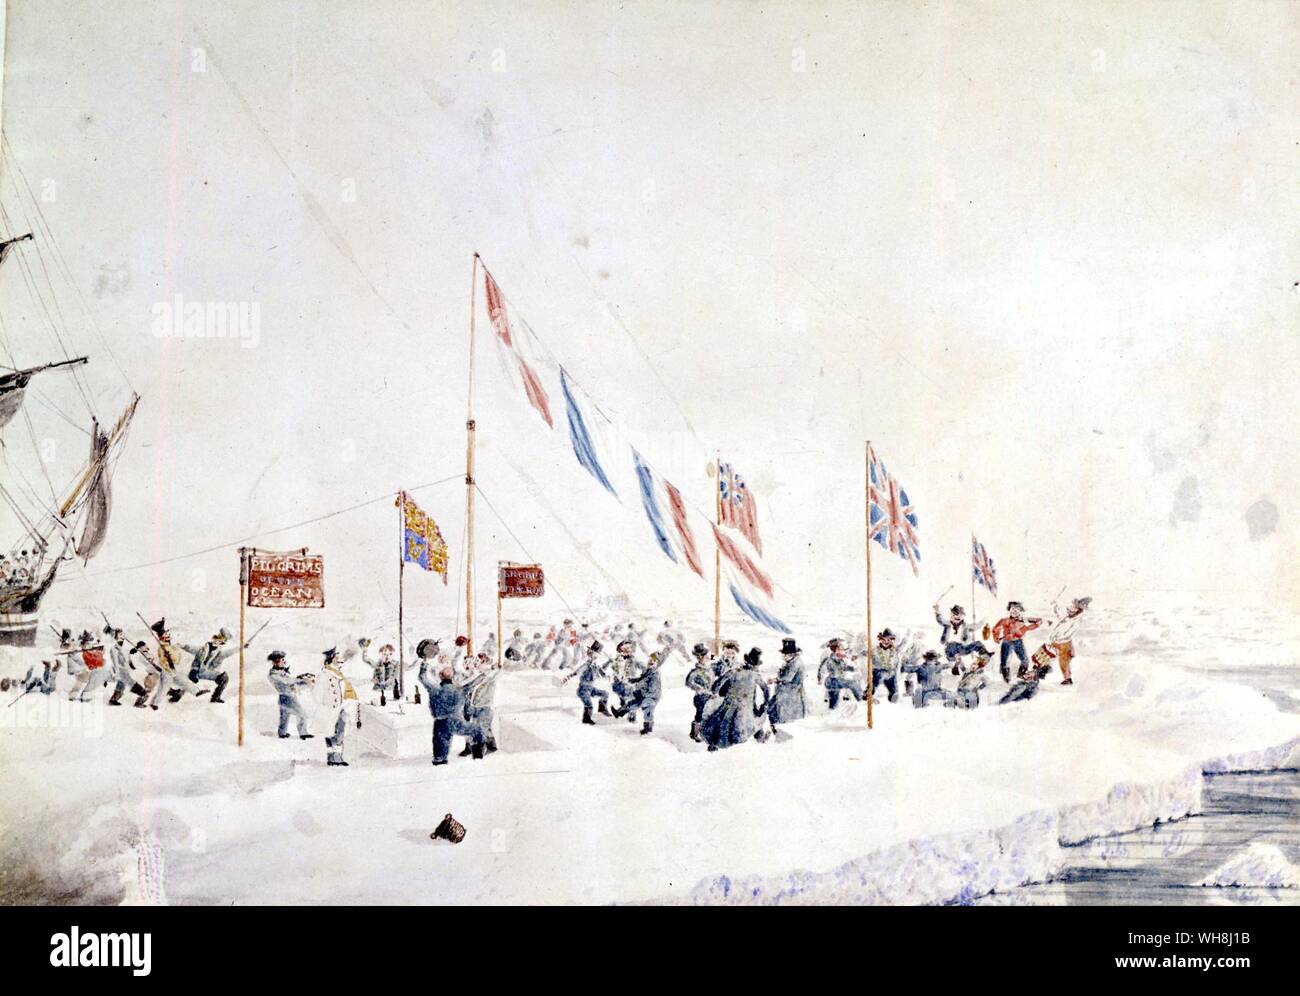 Celebrating New Year's Day 1842, on the ice floes in latitude 66 deg 32 min S, longitude 156 deg 28 min W, by John Edward Davis (1815-77). From Antarctica: The Last Continent by Ian Cameron, page 100. Stock Photo